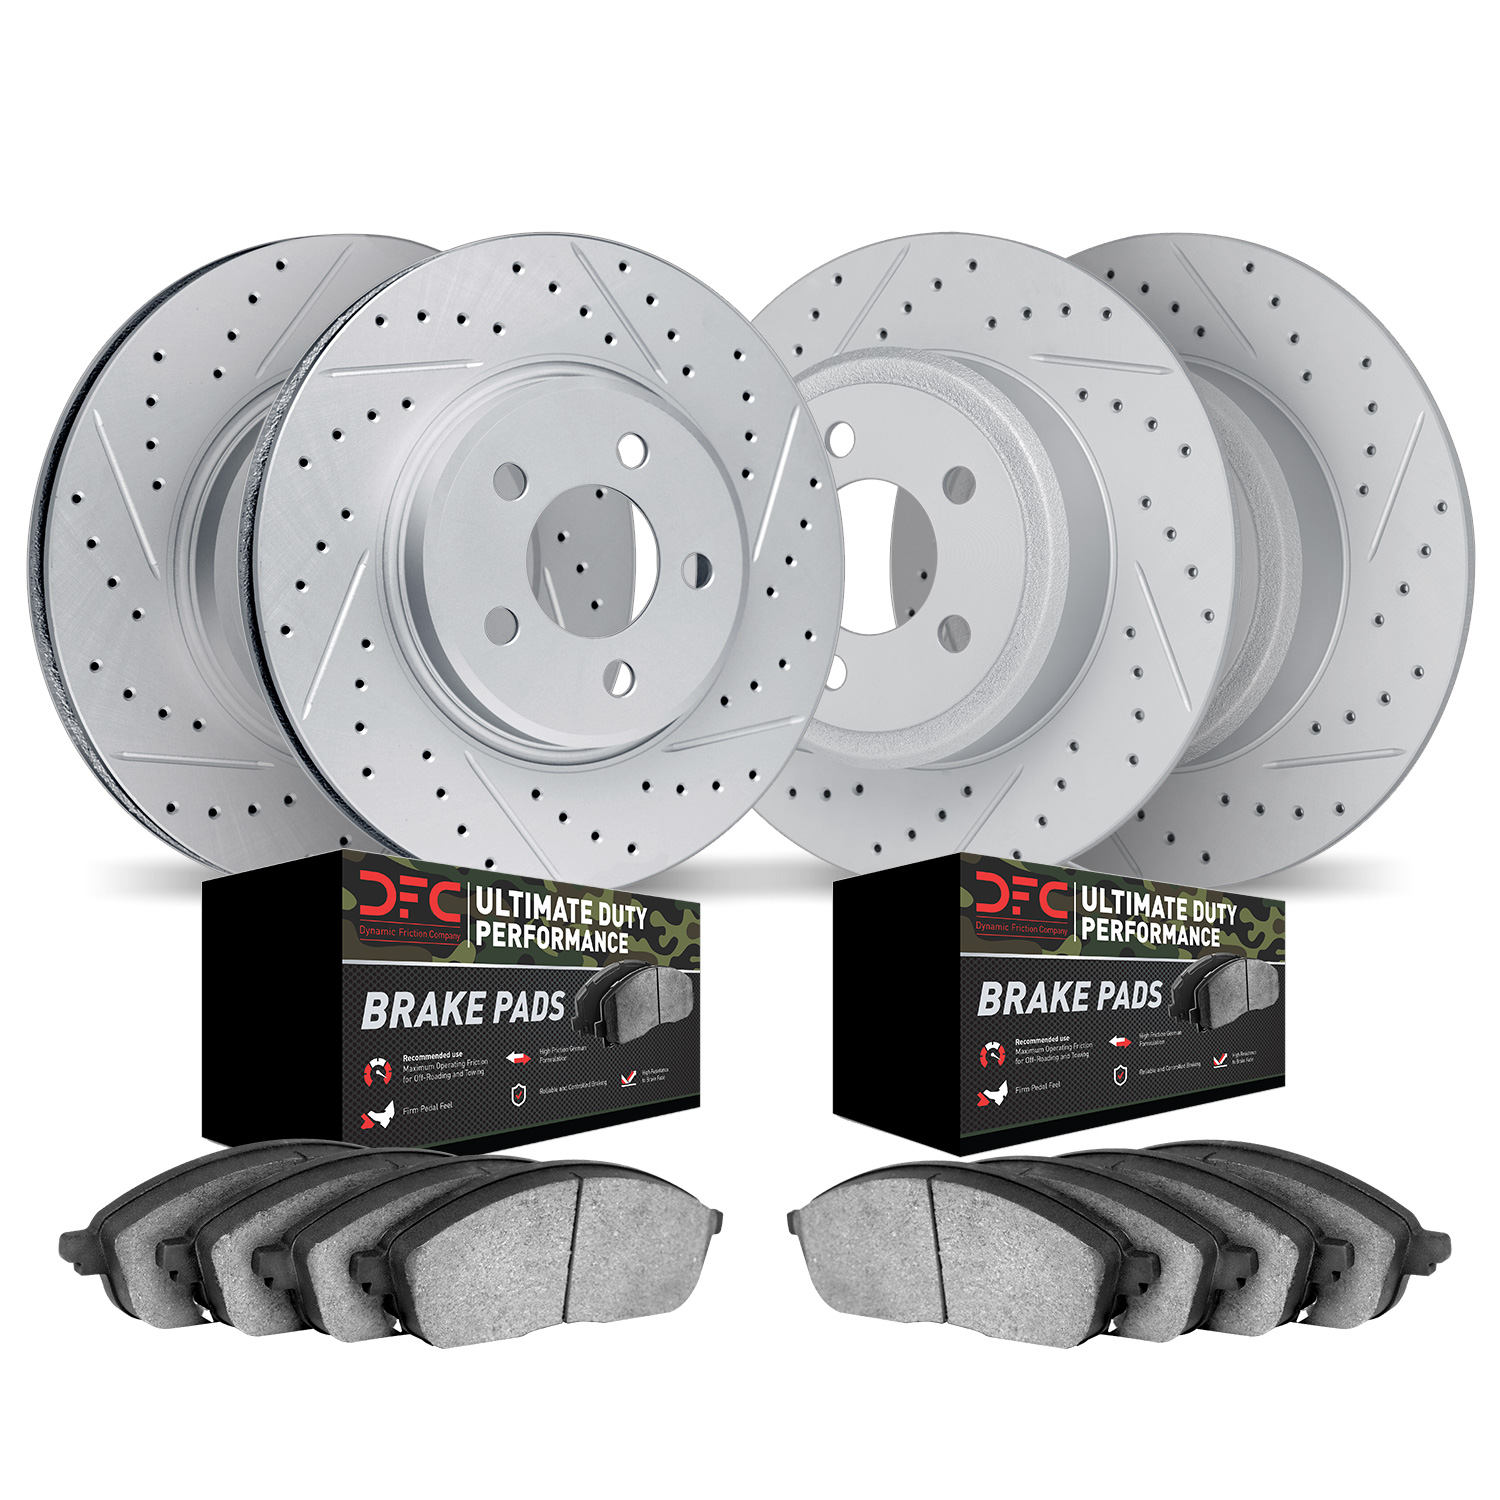 2404-42003 Geoperformance Drilled/Slotted Brake Rotors with Ultimate-Duty Brake Pads Kit, Fits Select Mopar, Position: Front and